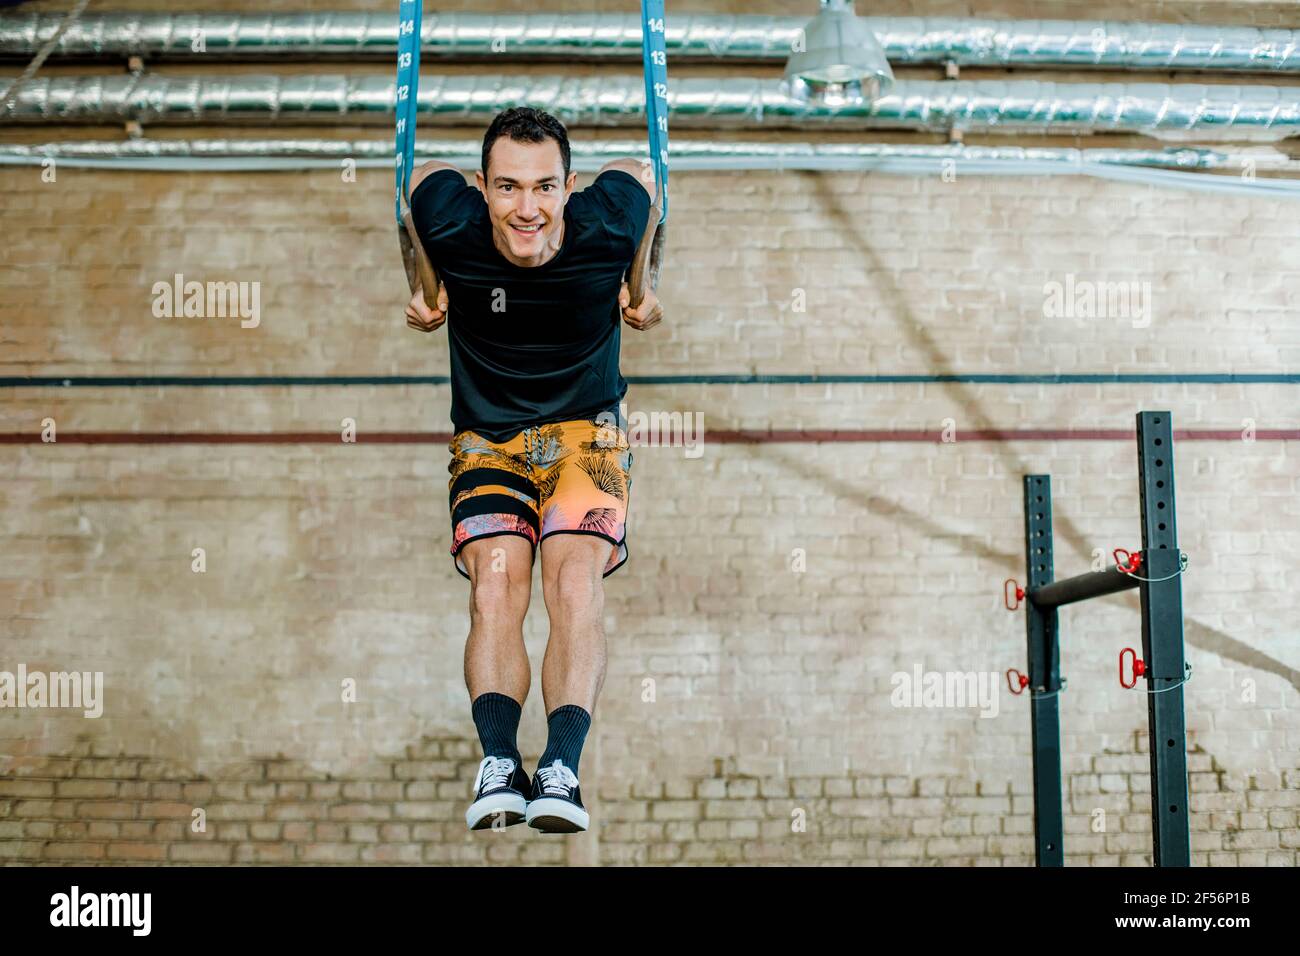 Smiling man hanging on gymnastic rings at health club Stock Photo